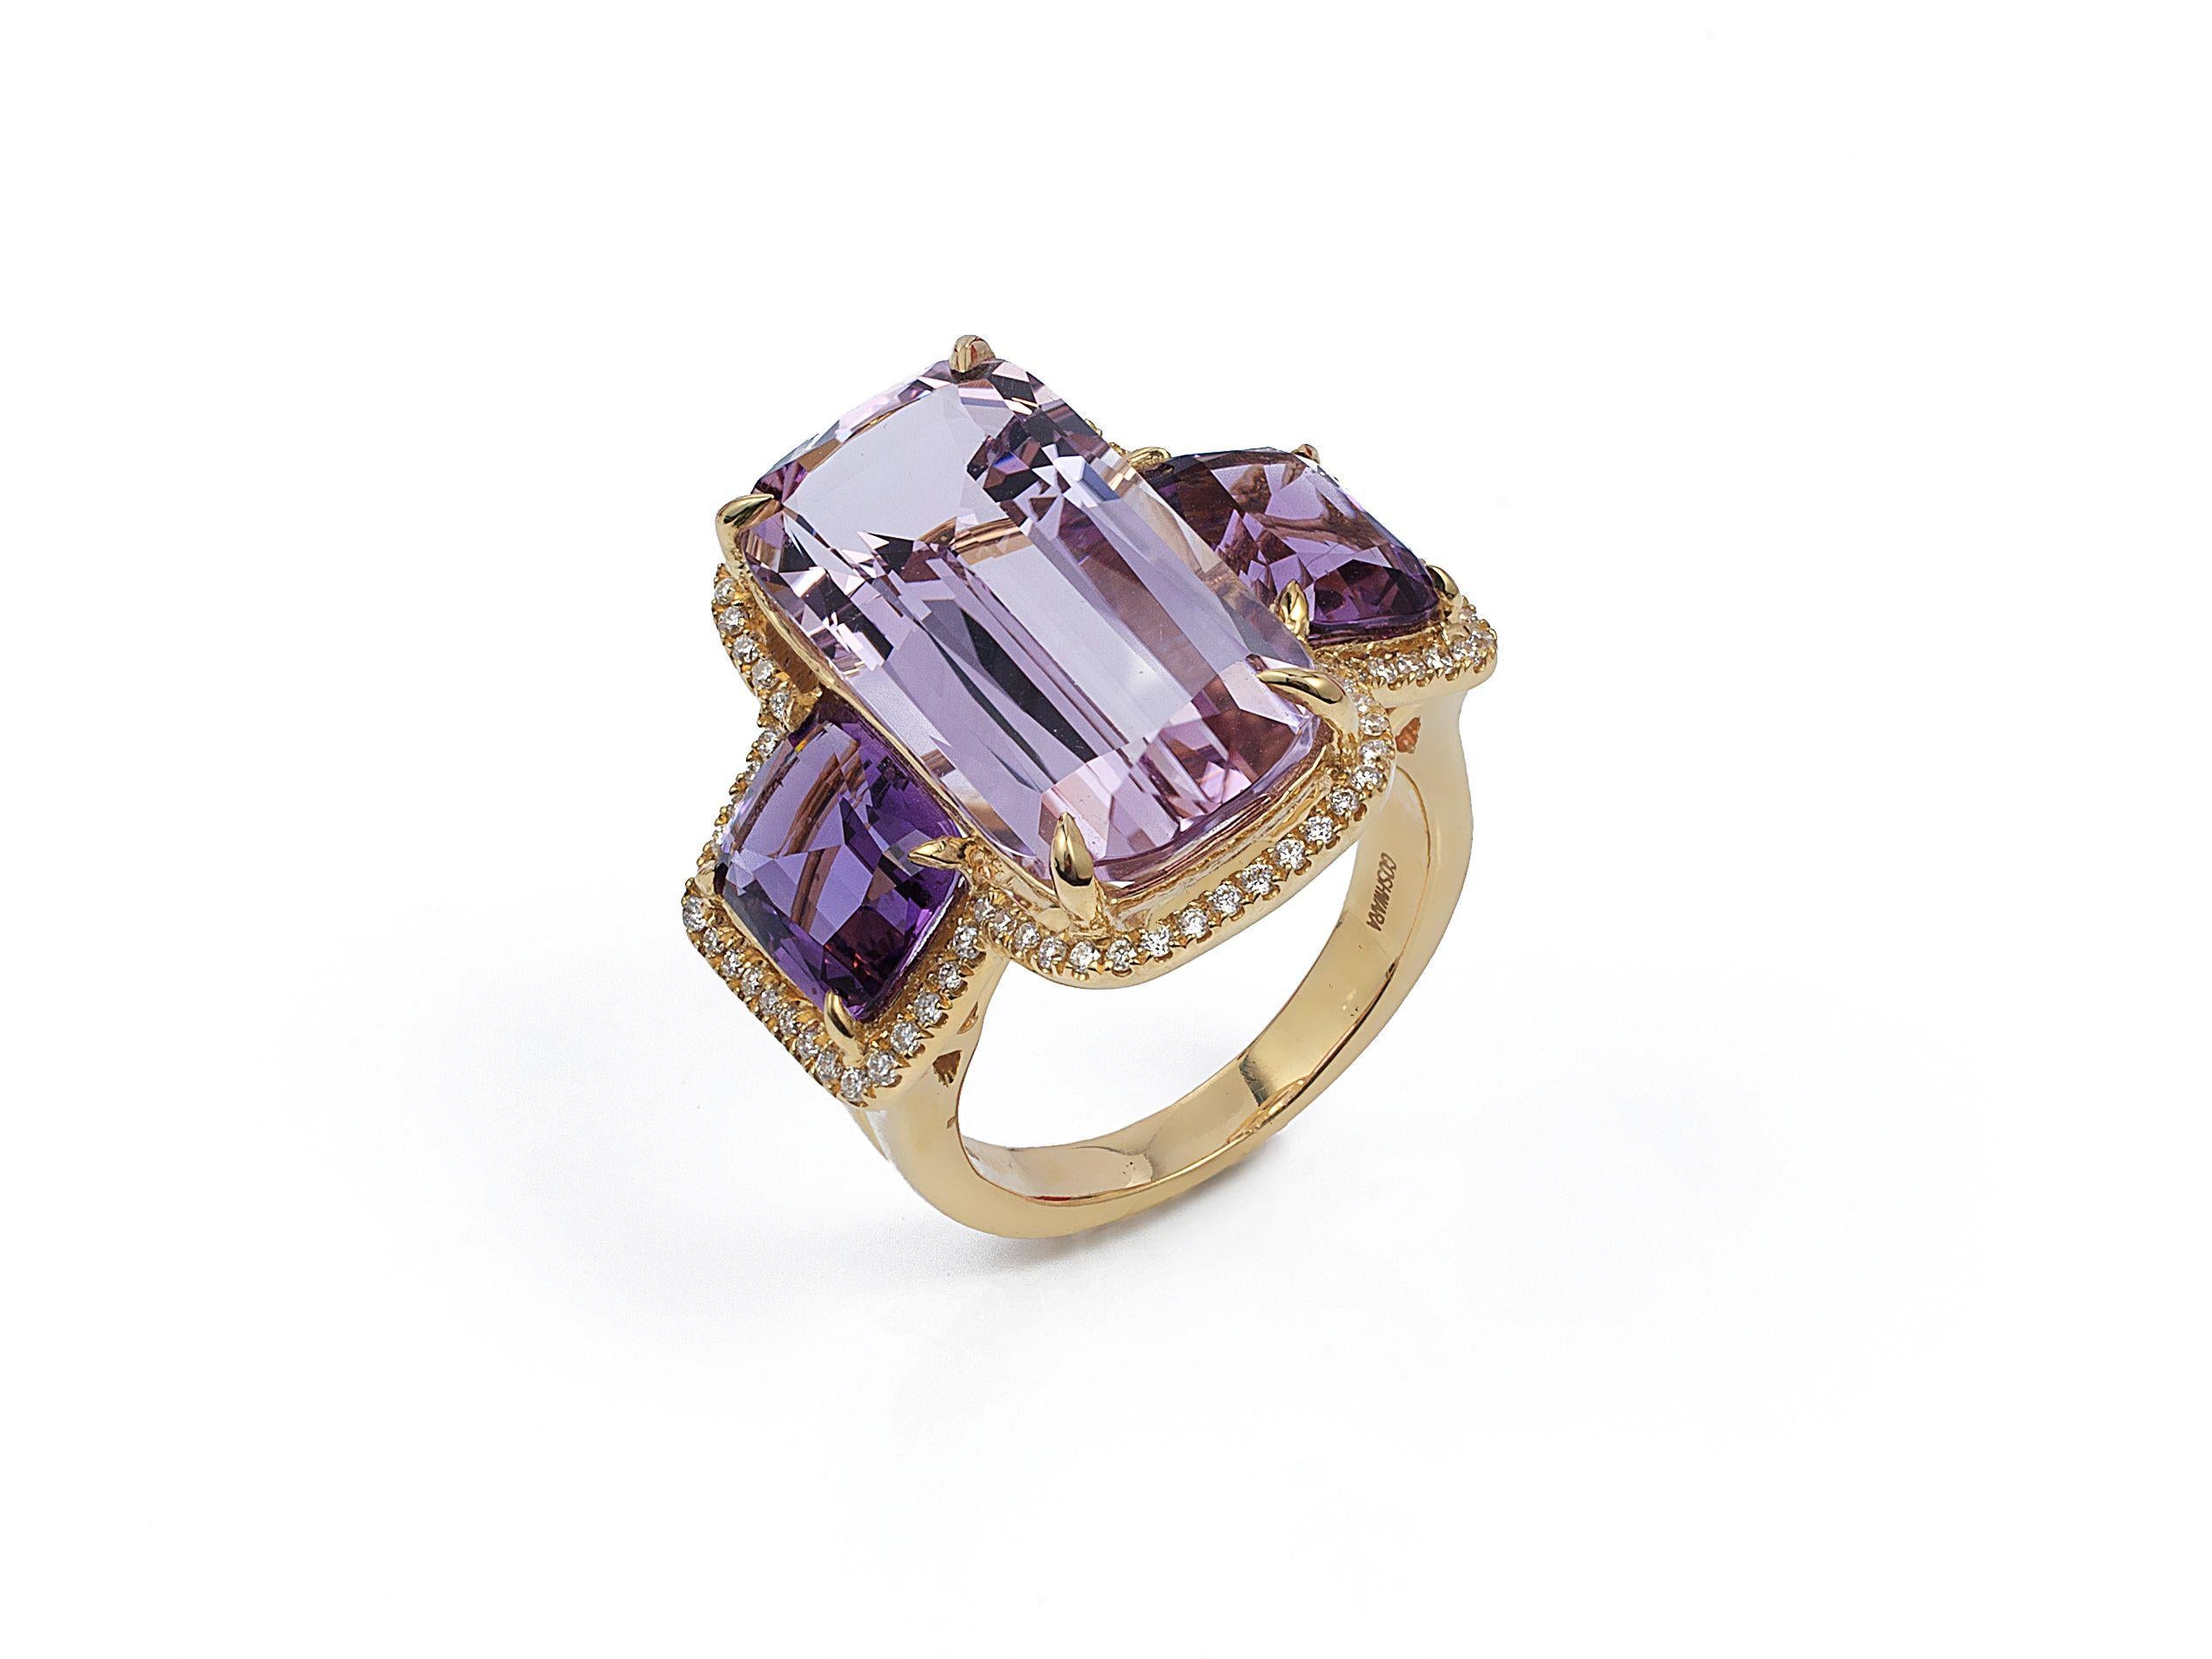 3 Stone Lavender Amethyst Cushion Ring with Diamonds in 18K Rose Gold, From 'Gossip' Collection. Like any good piece of gossip, this collection carries a hint of shock value. They will have everyone in suspense about what Goshwara will do next. 

*